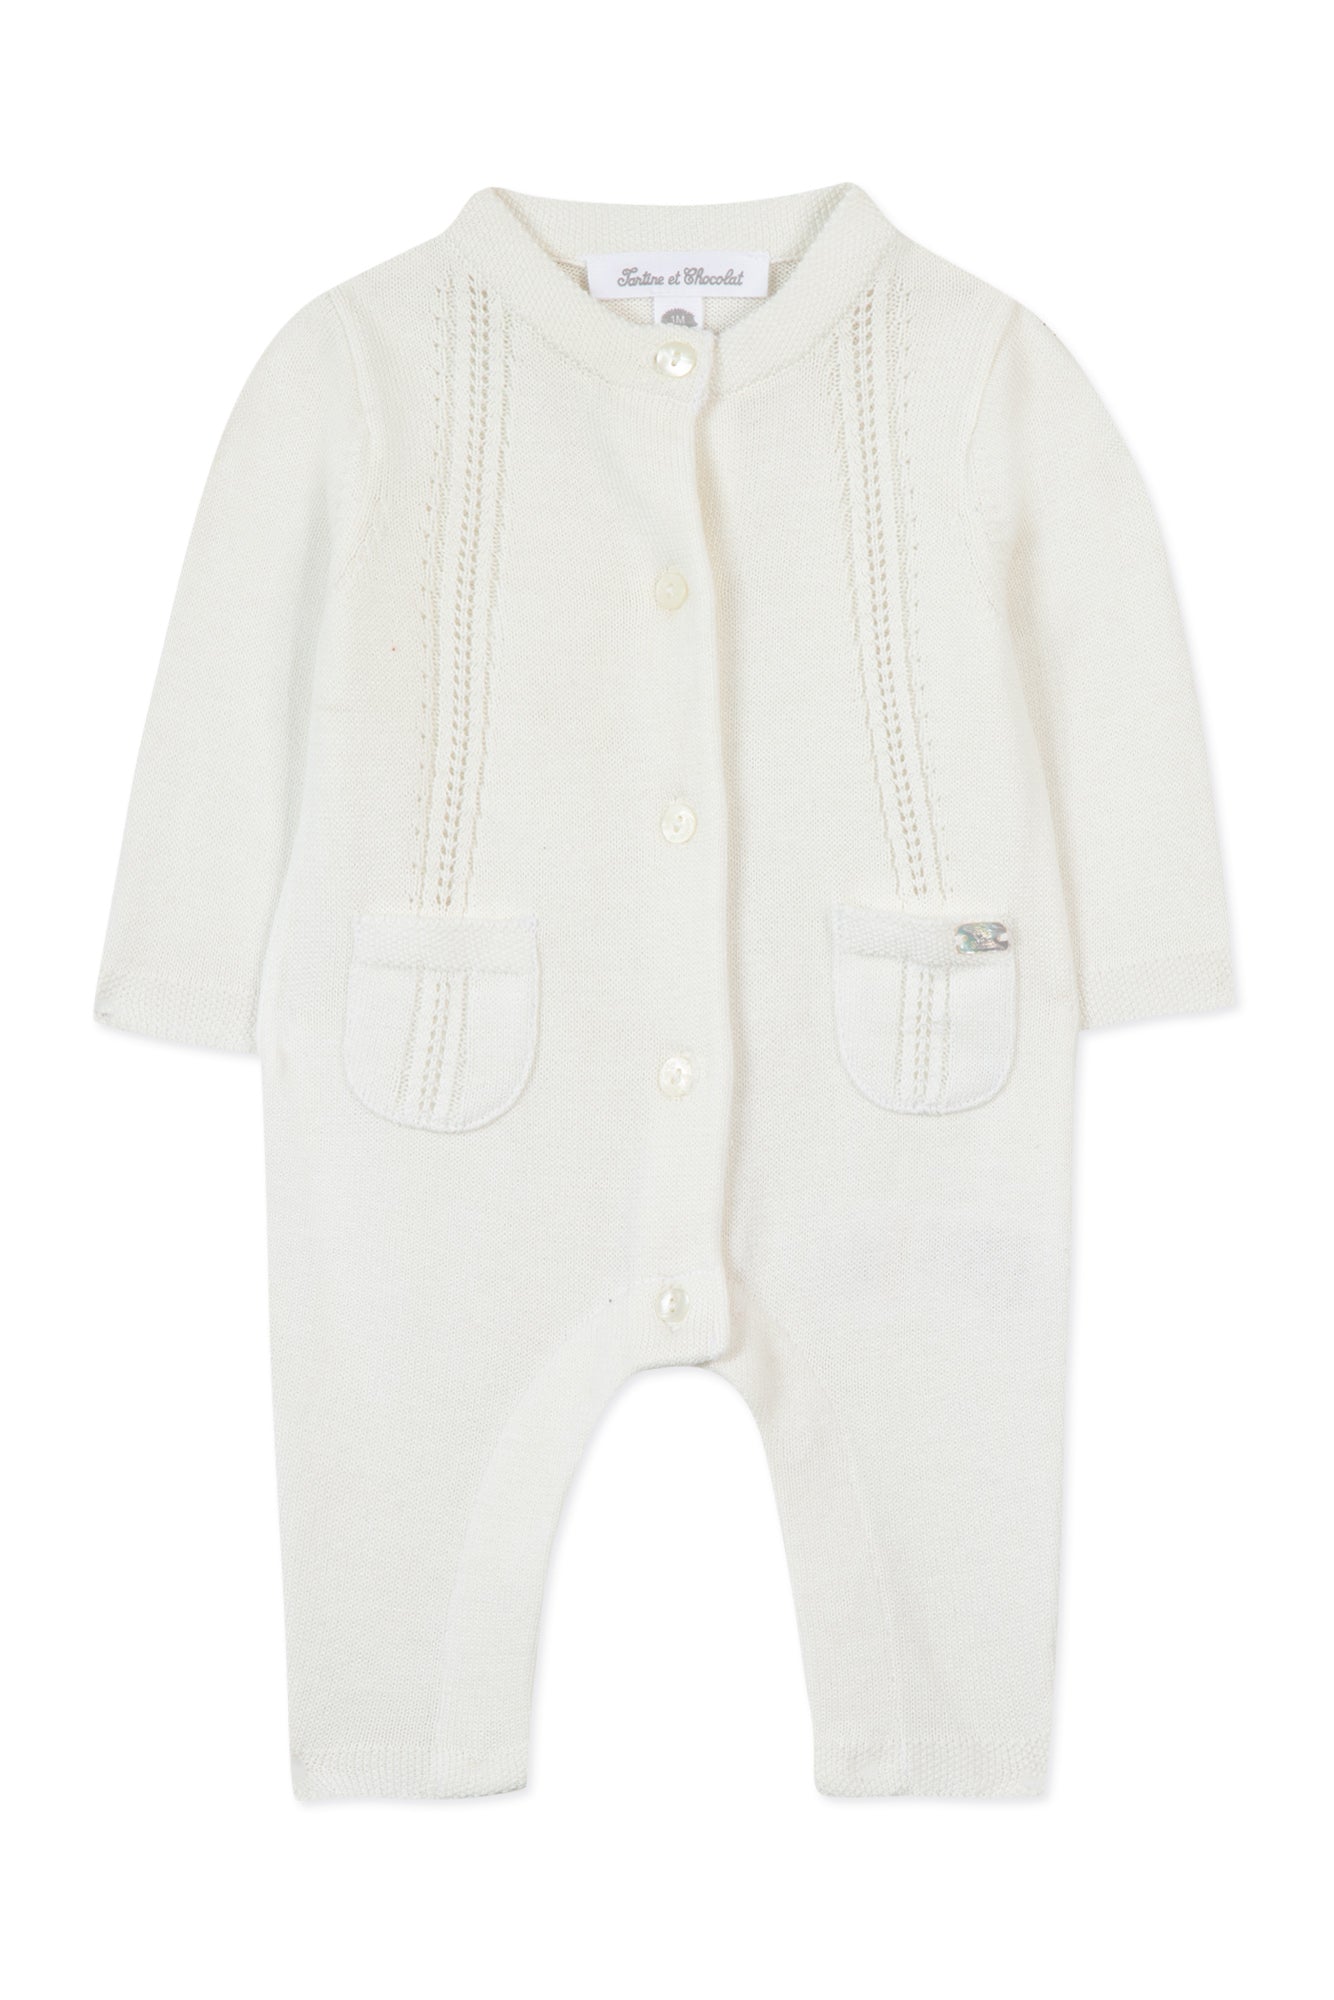 Baby Cable-Knitted Onesie - Off-White - GEMINI ATELIER